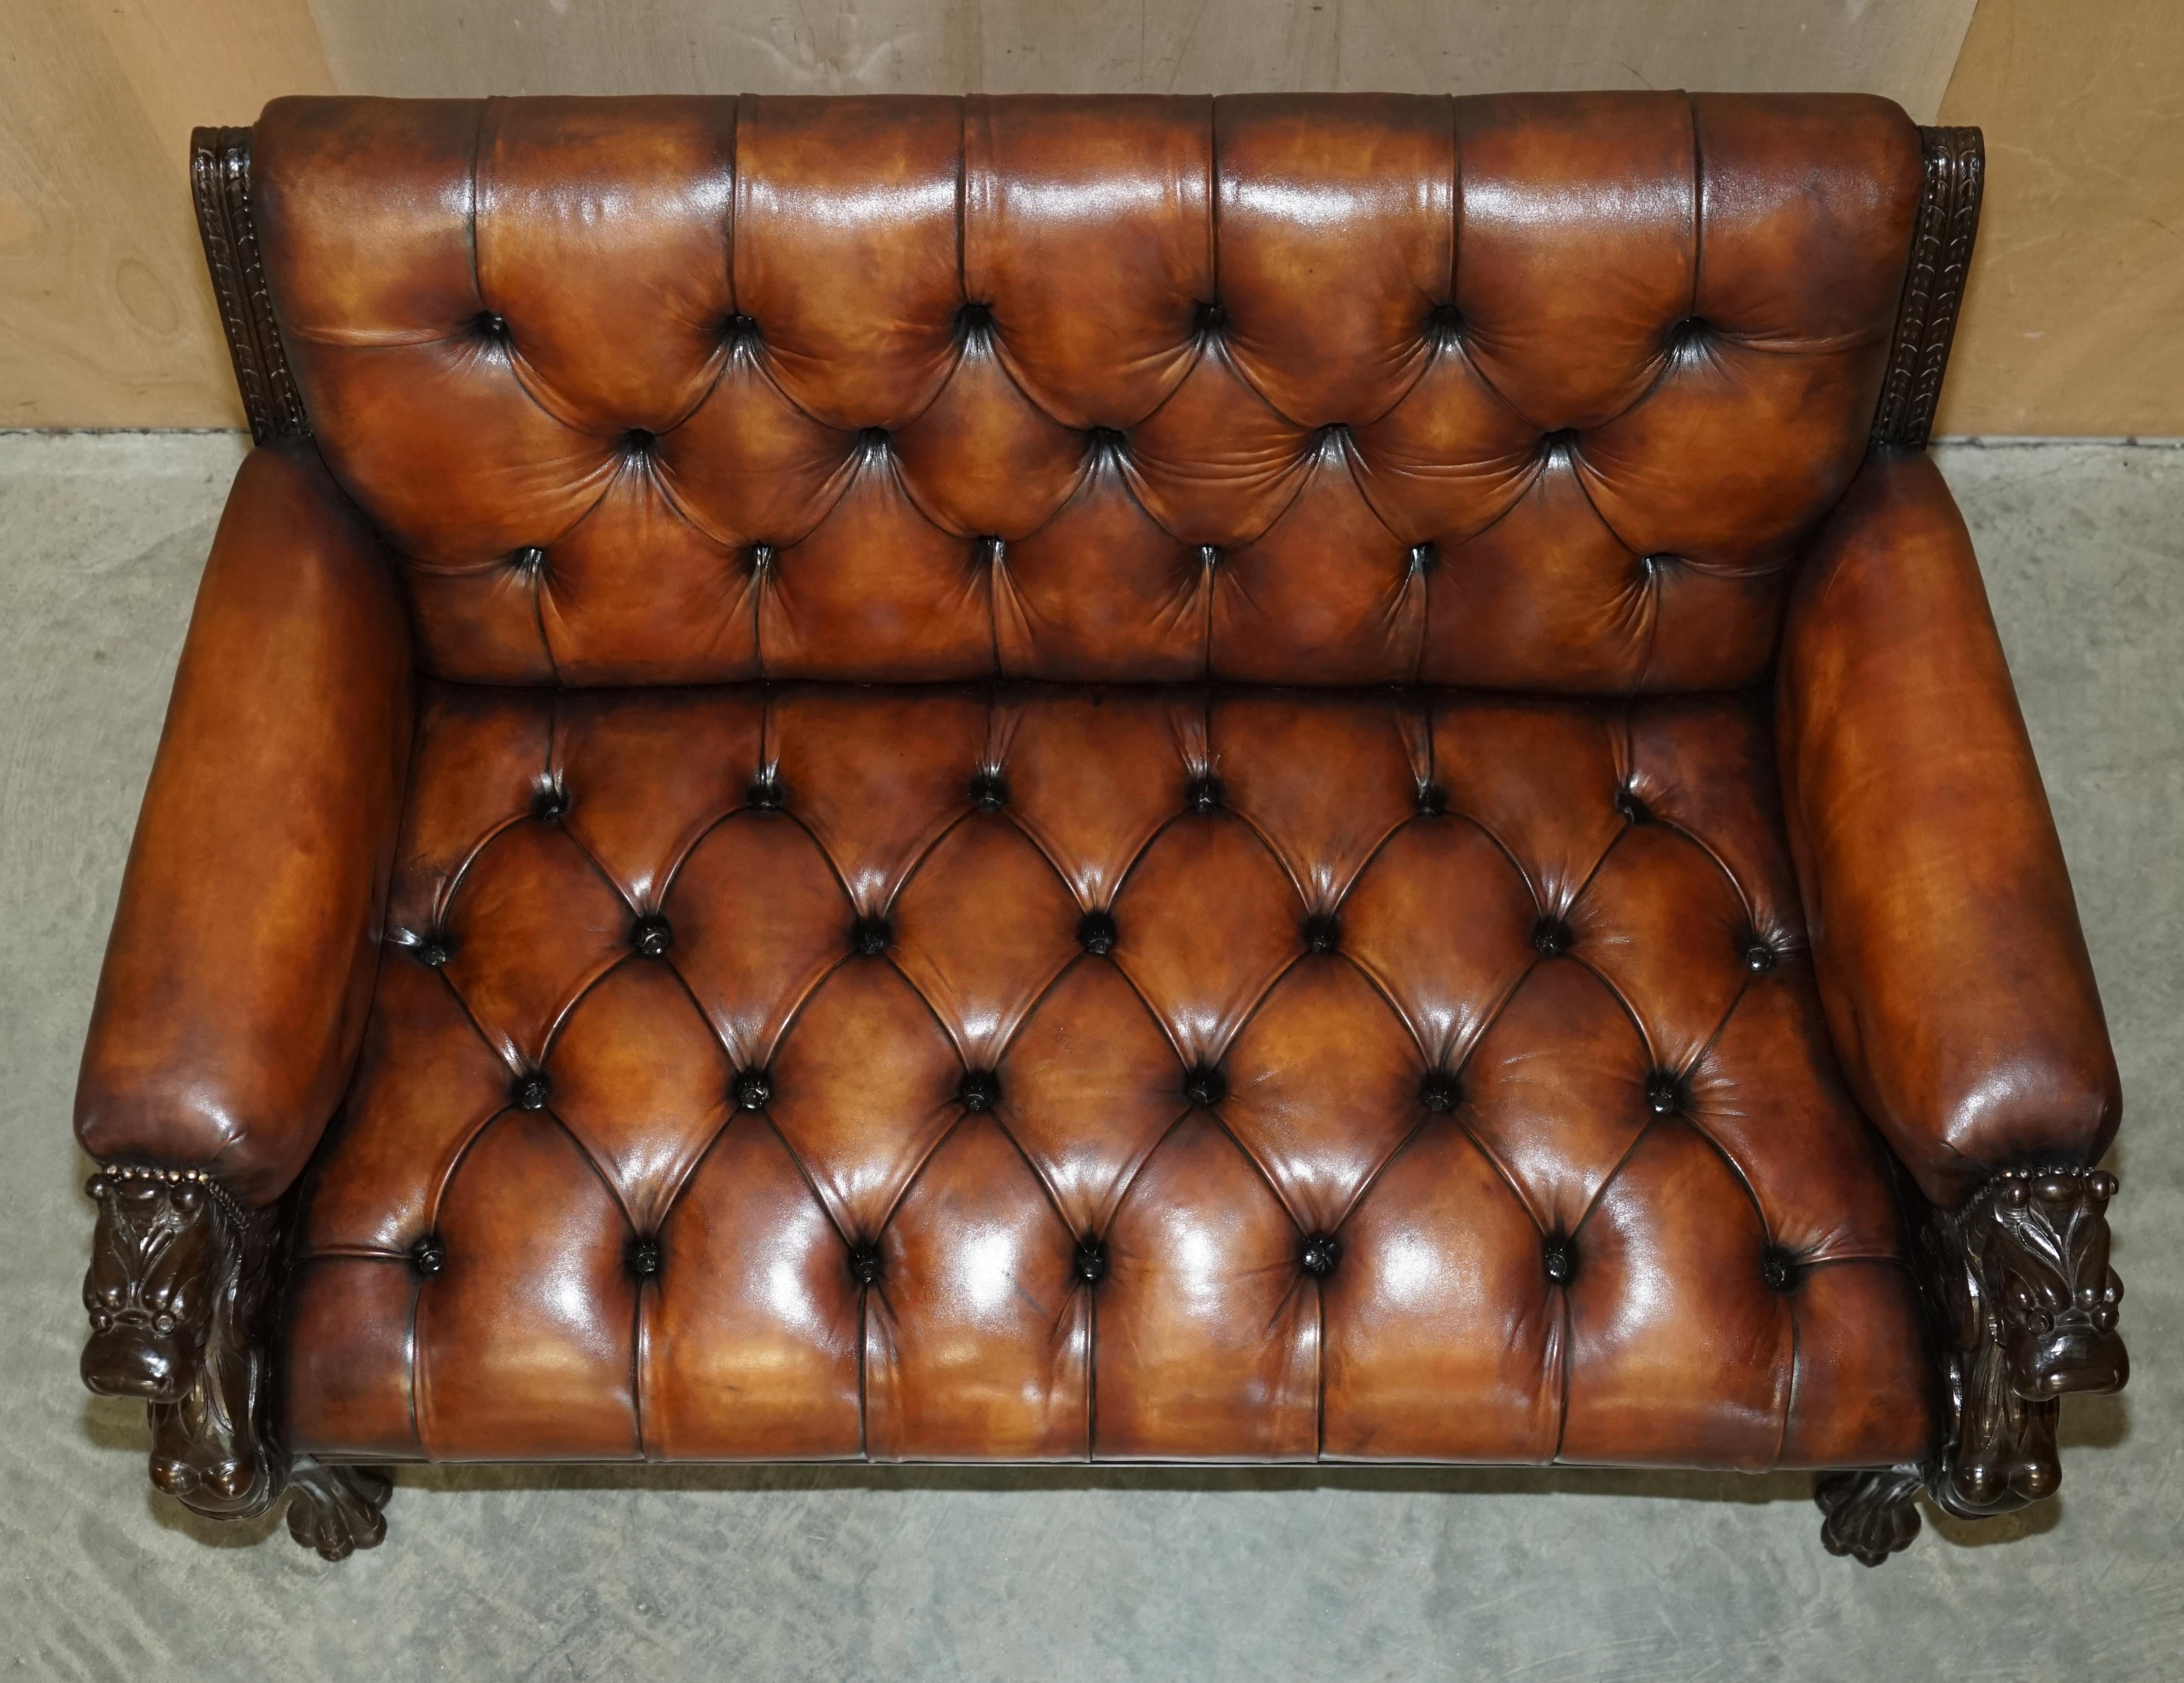 RESTORED ANTIQUE LiON HAND CARVED BROWN LEATHER CHESTERFIELD SOFA ARMCHAIR SUITE im Angebot 3